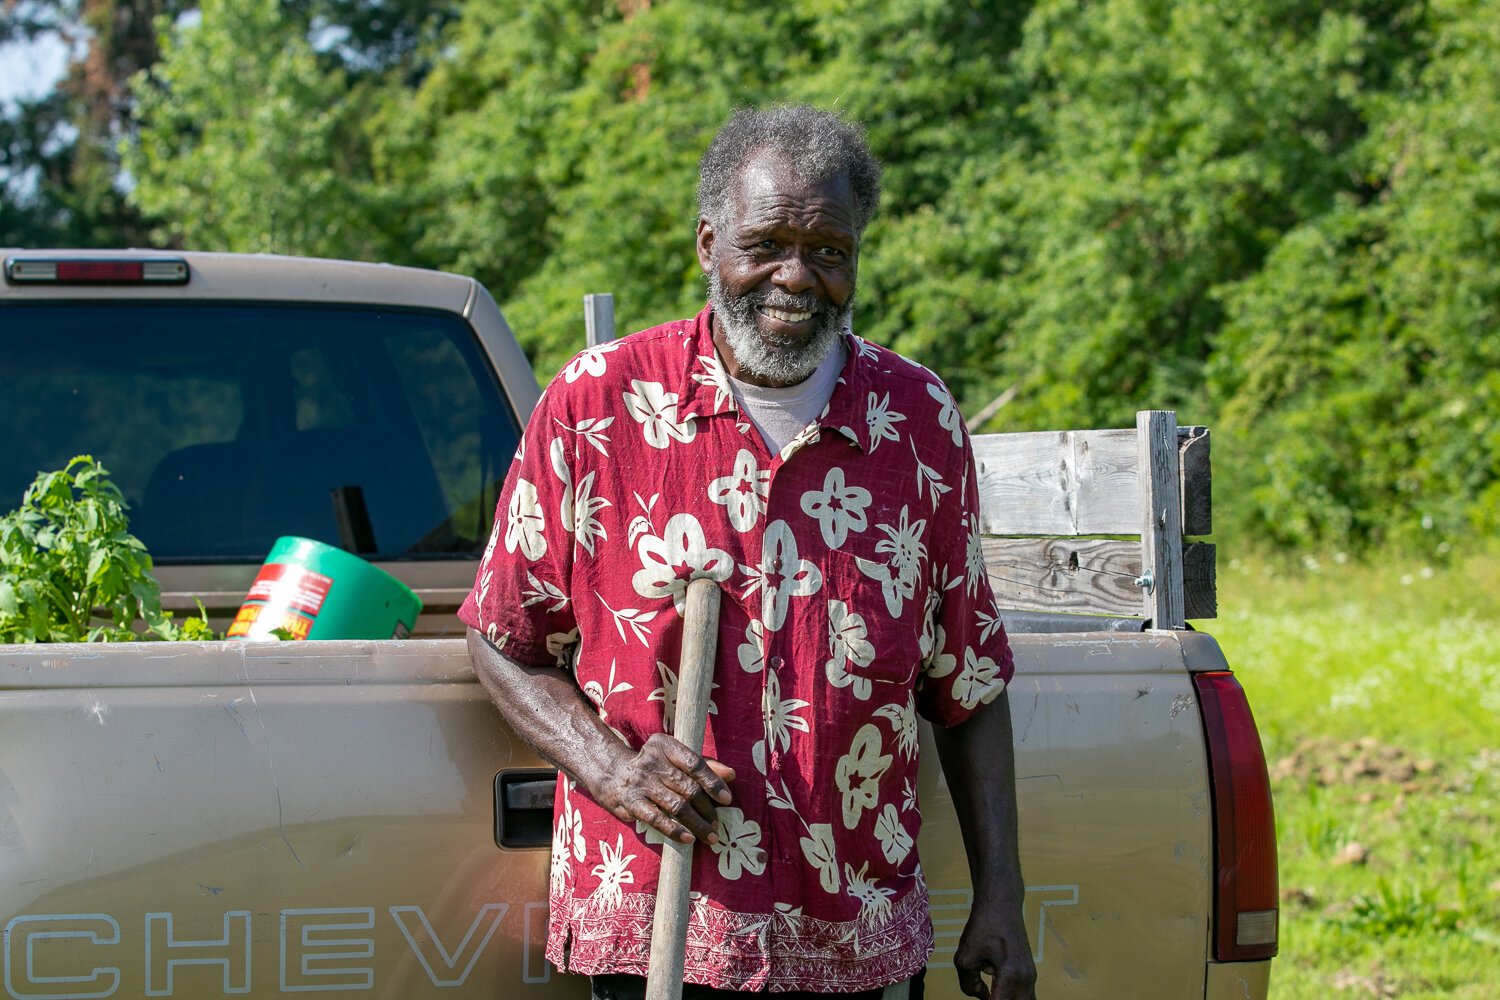 Ephraim Smiley of Smiley’s Garden Angels has been farming for more than 25 years.